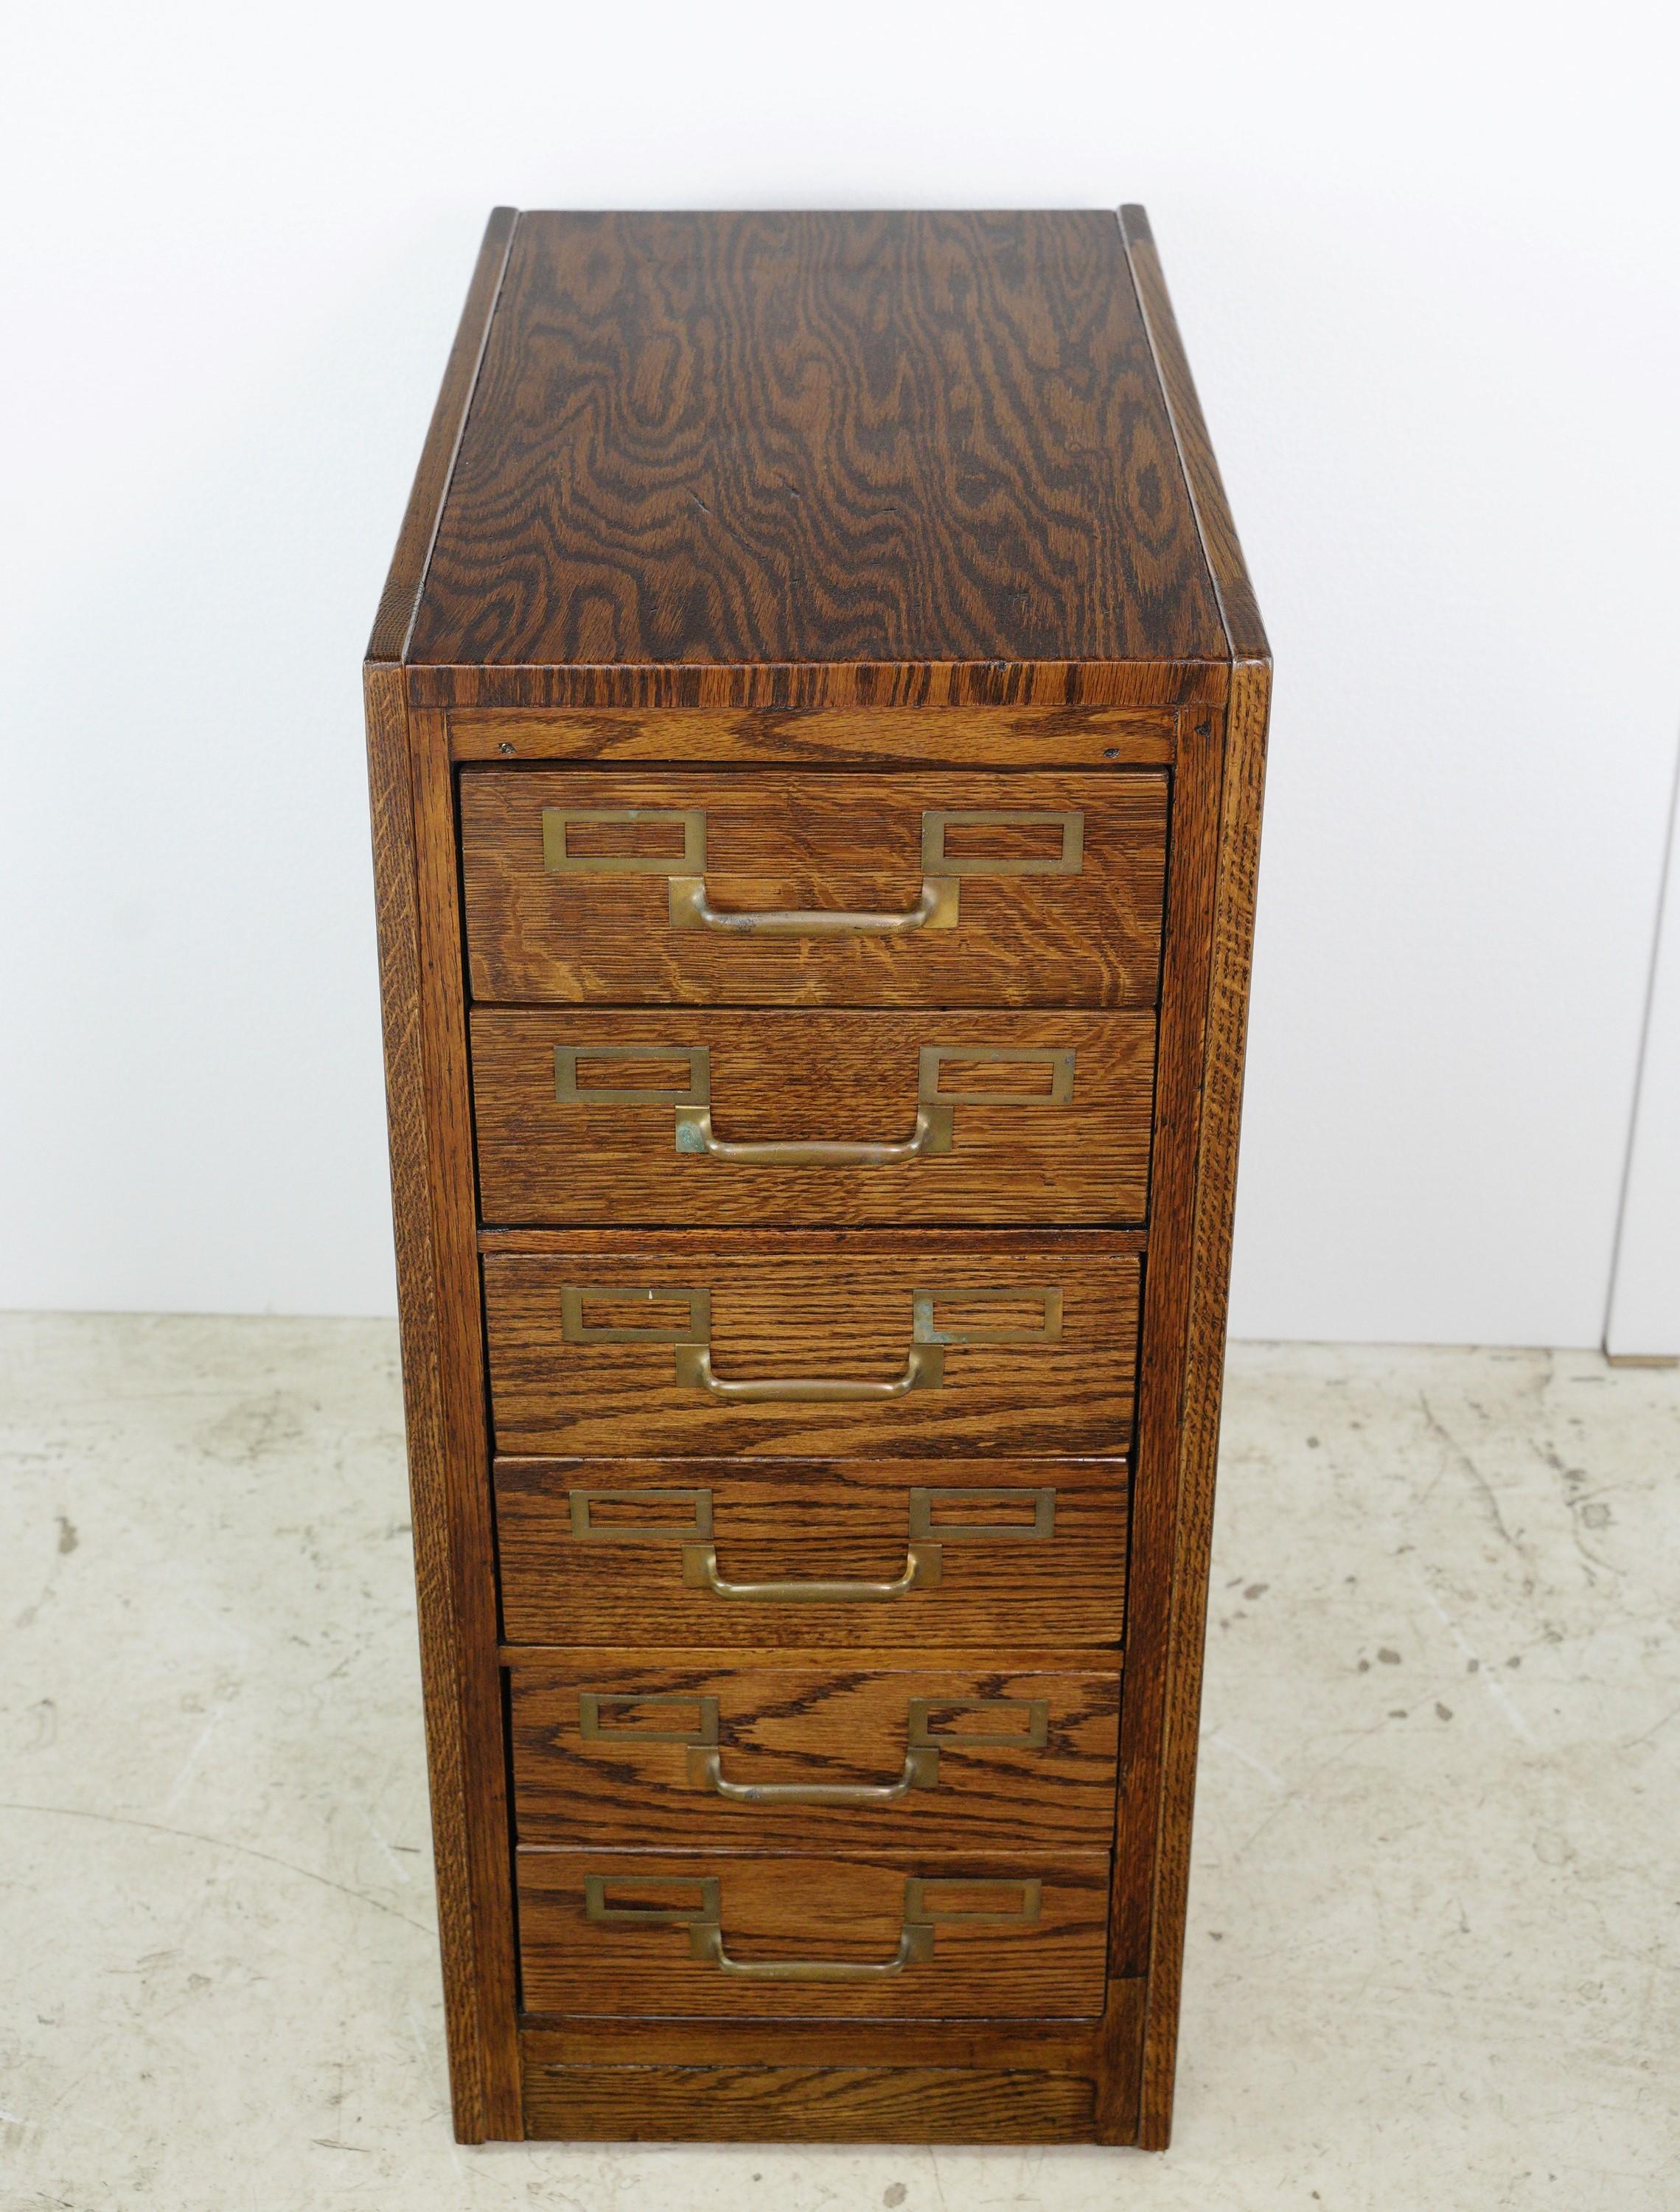 This antique tiger oak filing cabinet with six steel drawers and brass hardware is a rare gem from the past, combining the elegance of tiger oak grain with the durability of steel and timeless brass accents. This piece is unmarked. It is in great